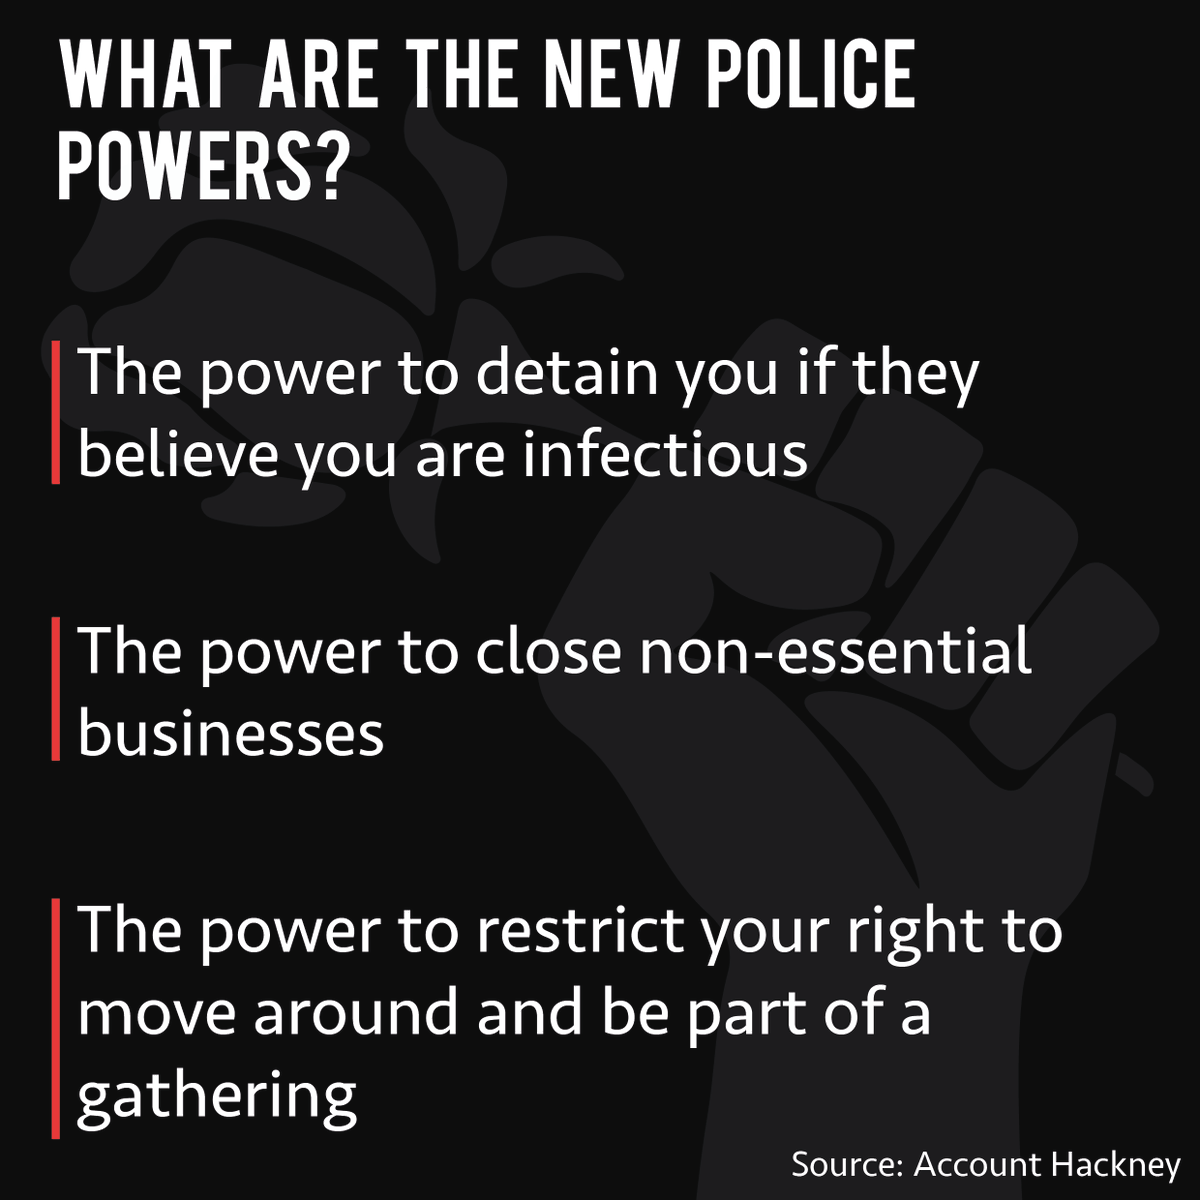 Know Your RightsWhat are the new police powers? The power to detain you if they believe you are infectious The power to close non-essential businesses The power to restrict your right to move around and be part of a gathering